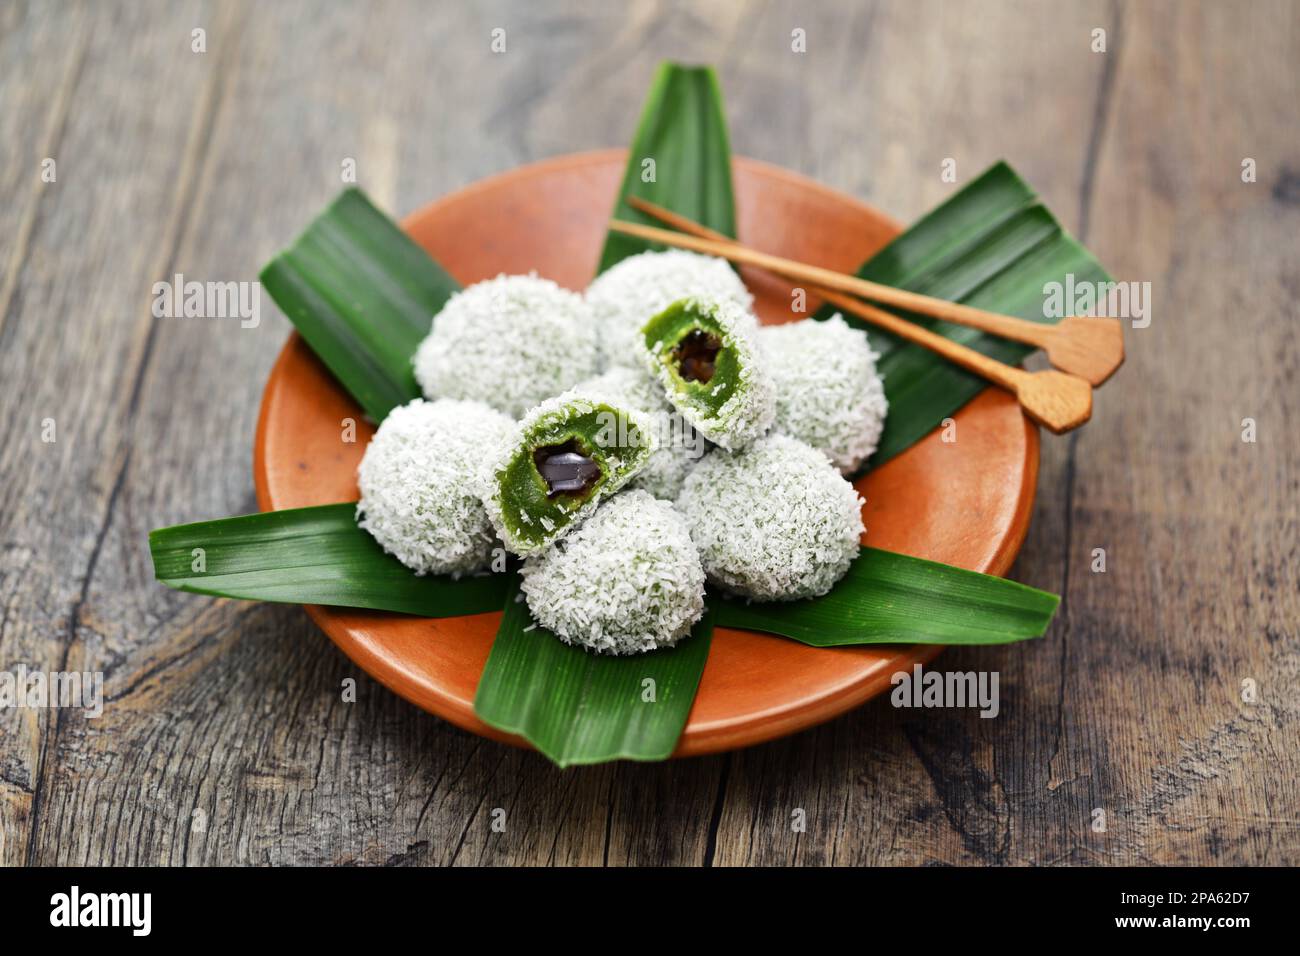 Onde-onde is a traditional Malaysian dessert consisting of green(made from pandan leaves juice) glutinous rice balls filled with palm sugar and coated Stock Photo